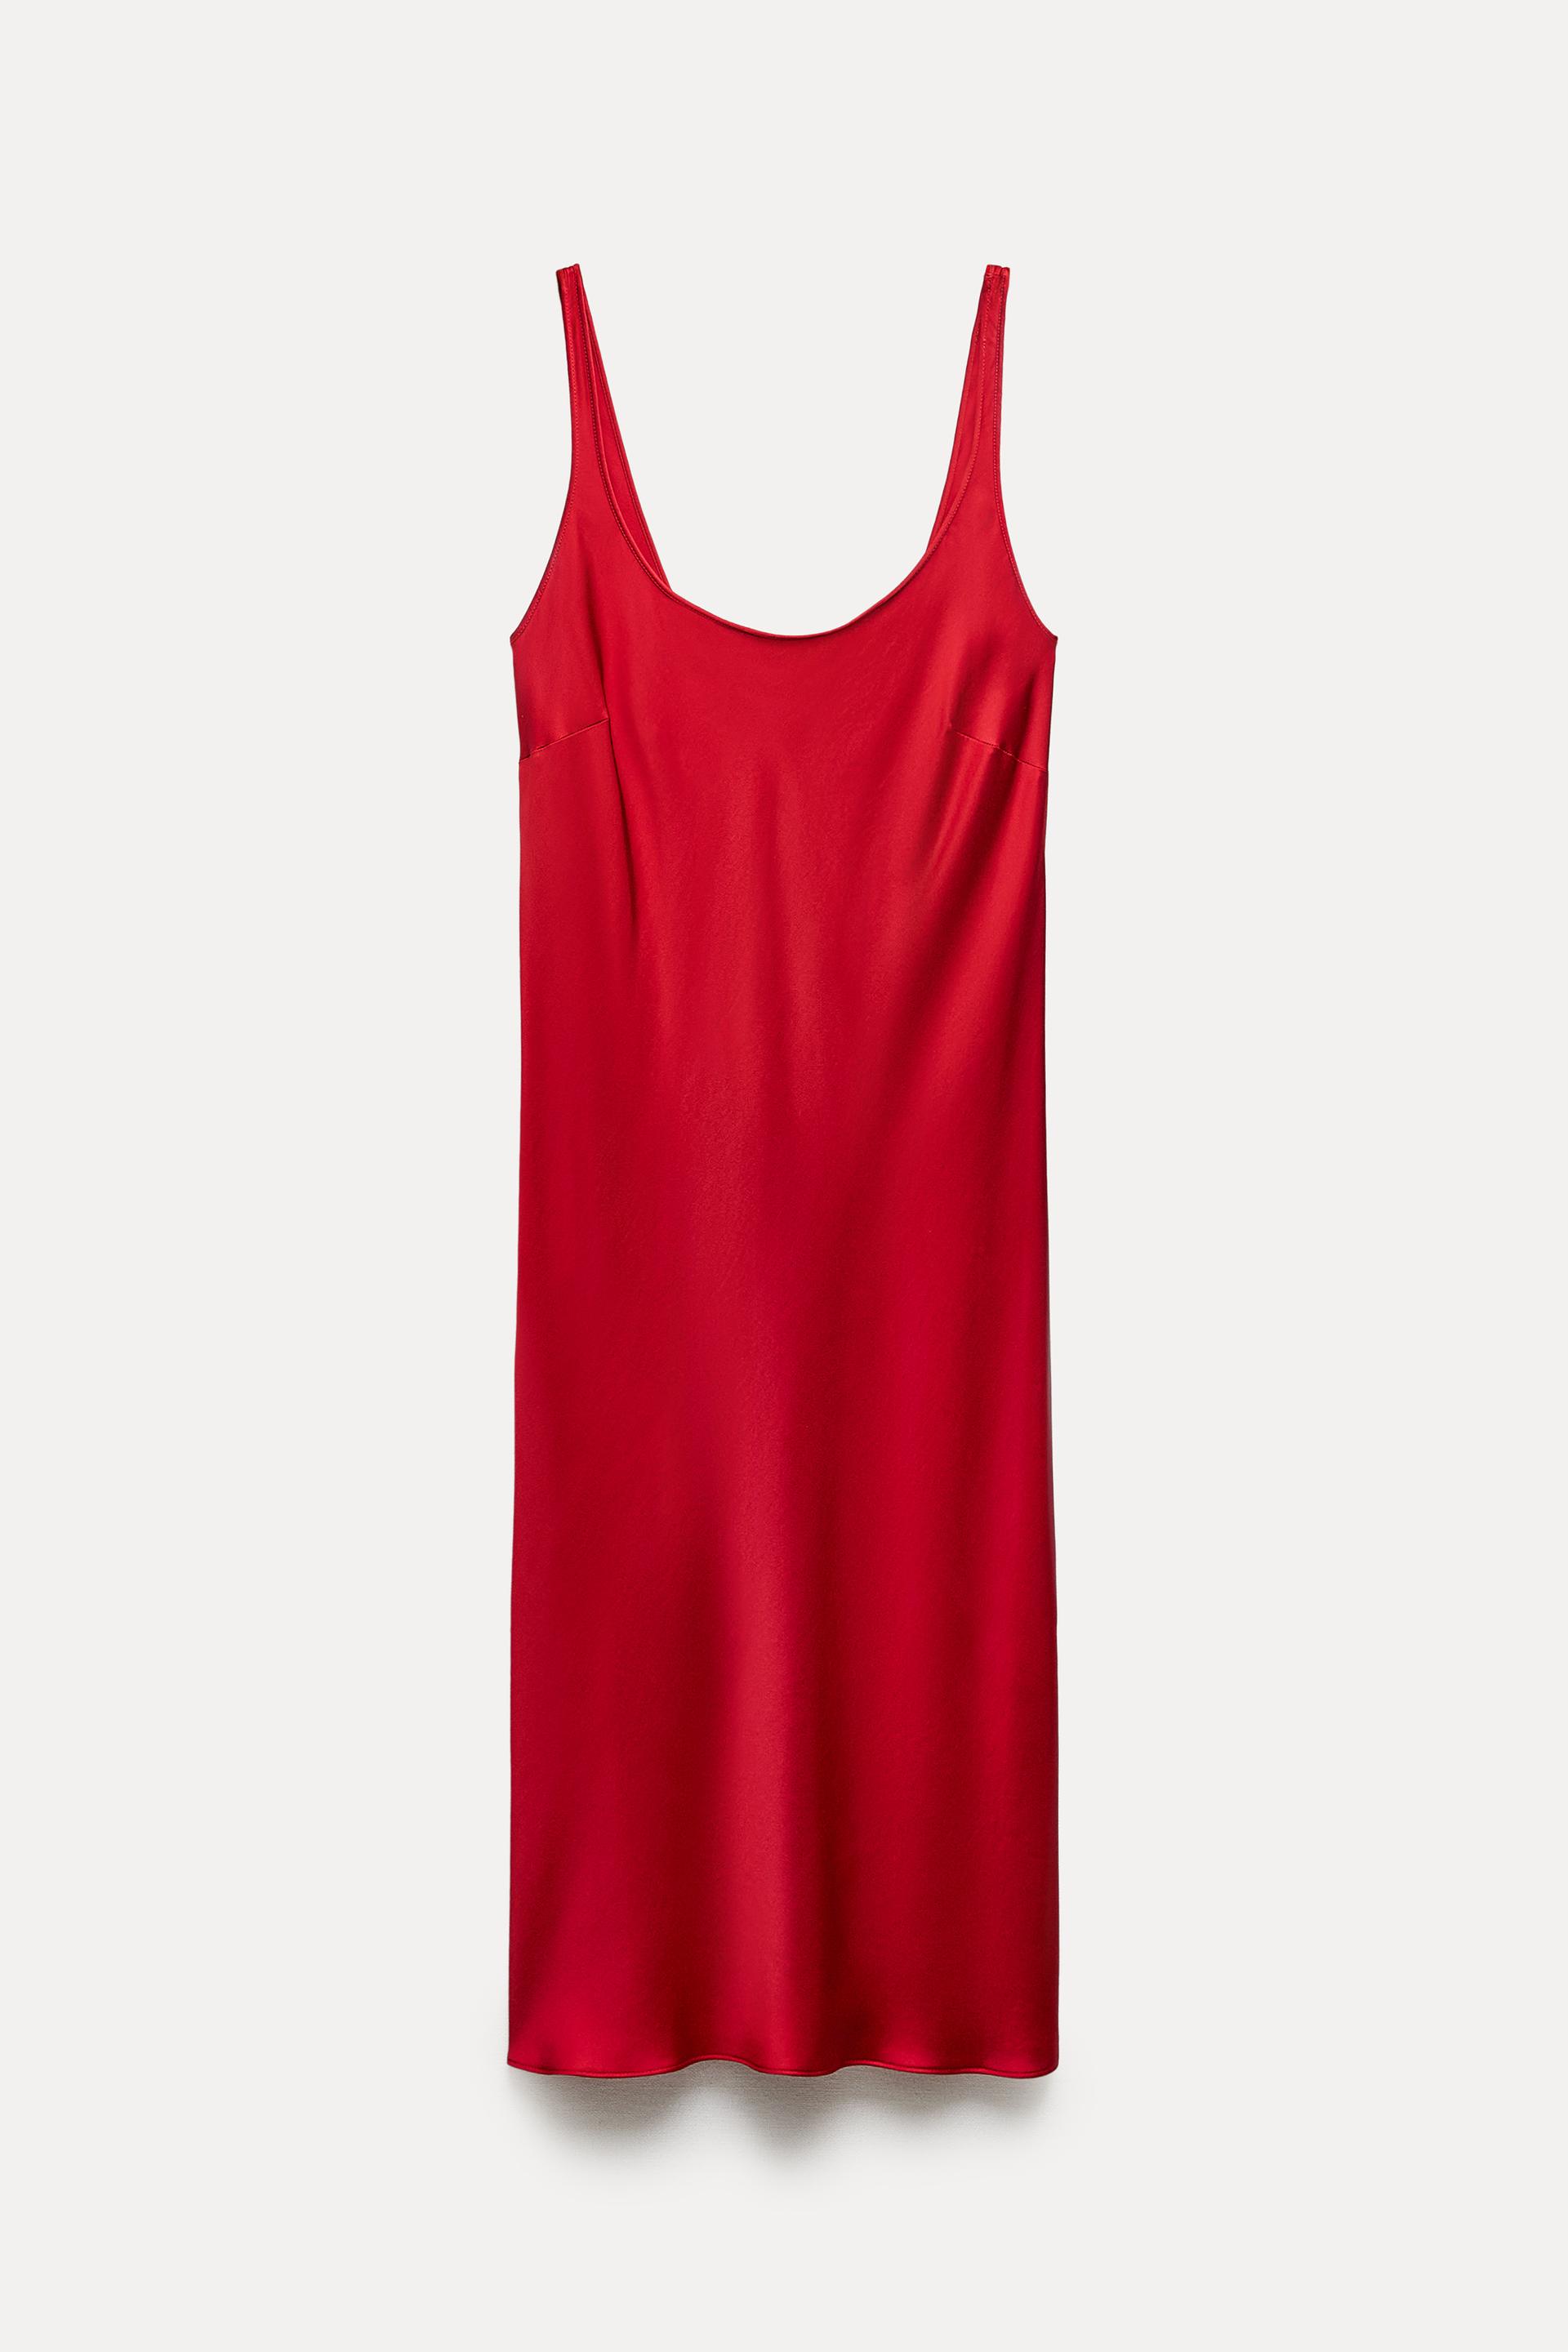 SATIN EFFECT DRESS ZW COLLECTION - Red